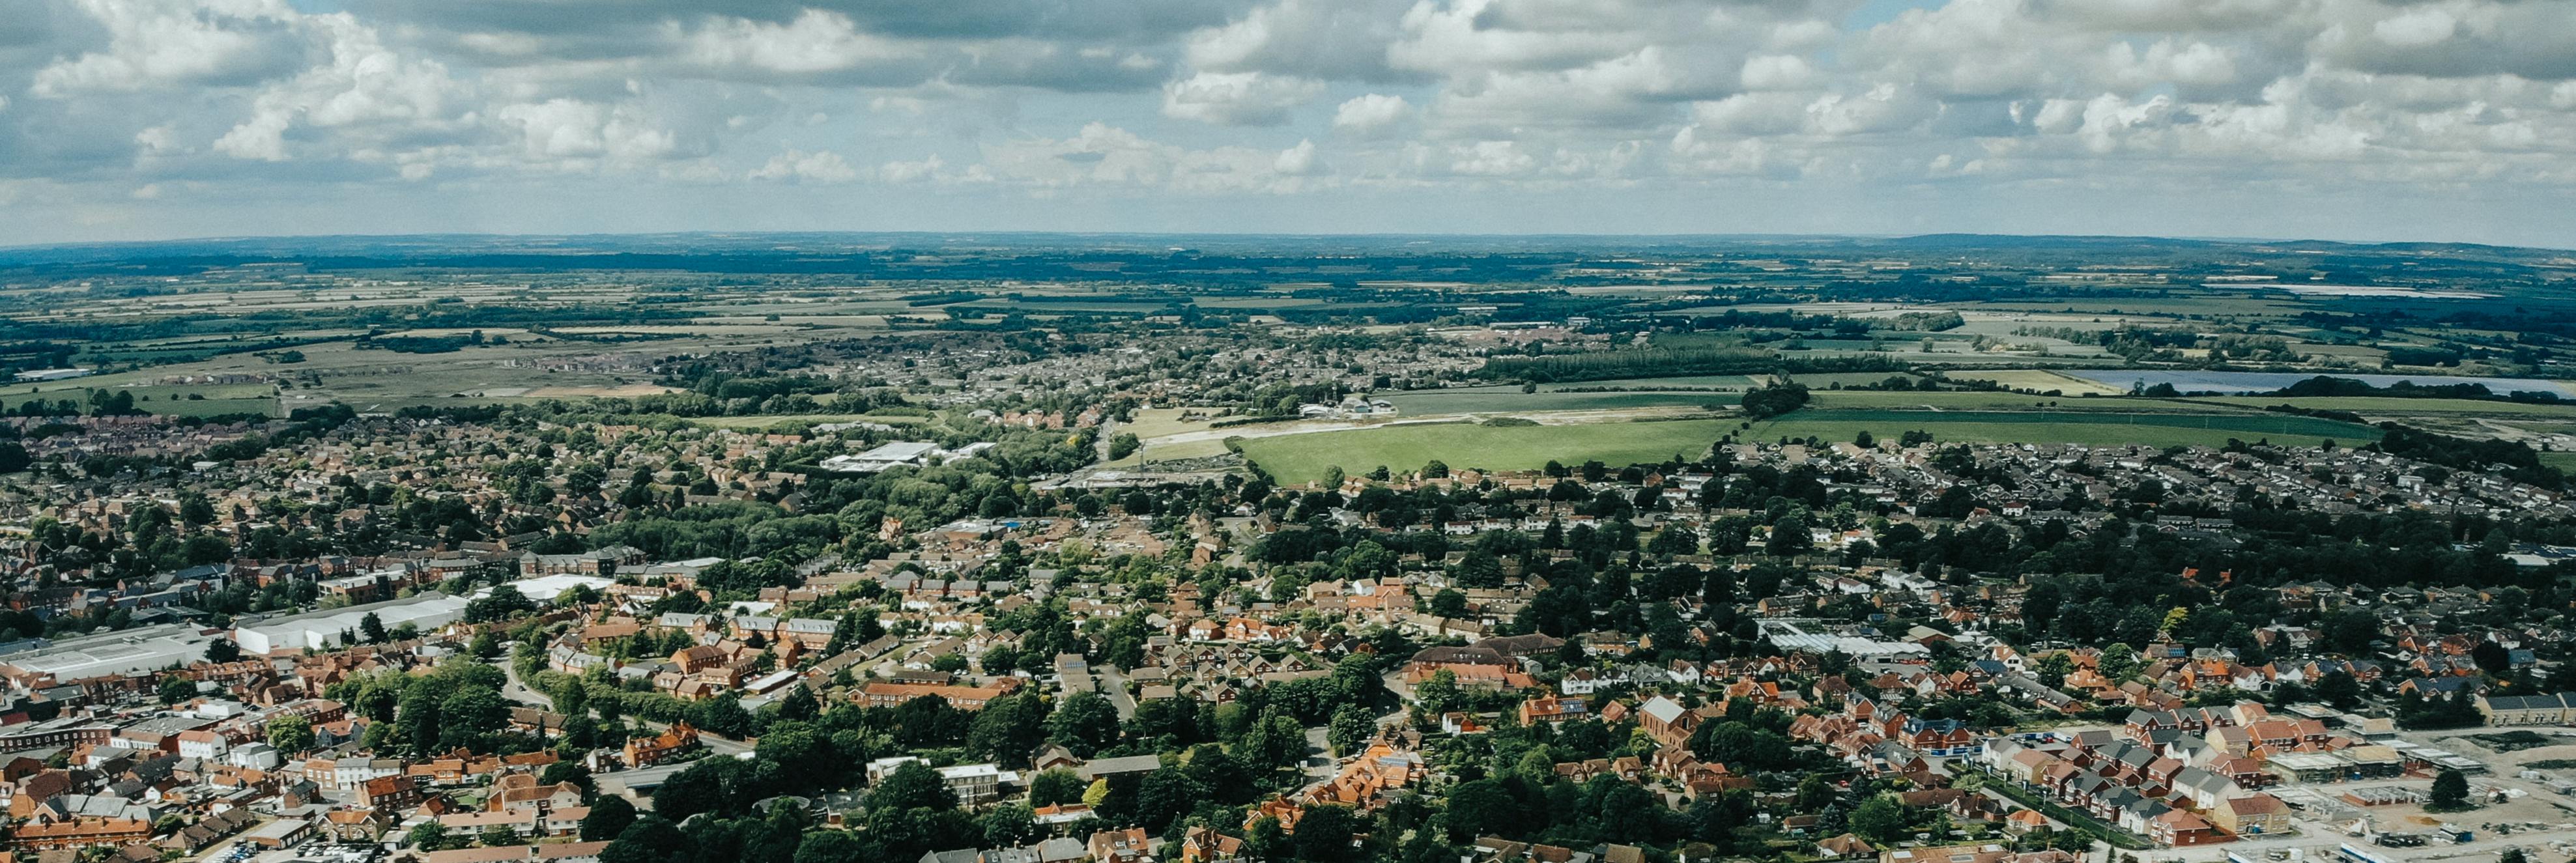 An aerial view over an Oxfordshire town with countryside behind it